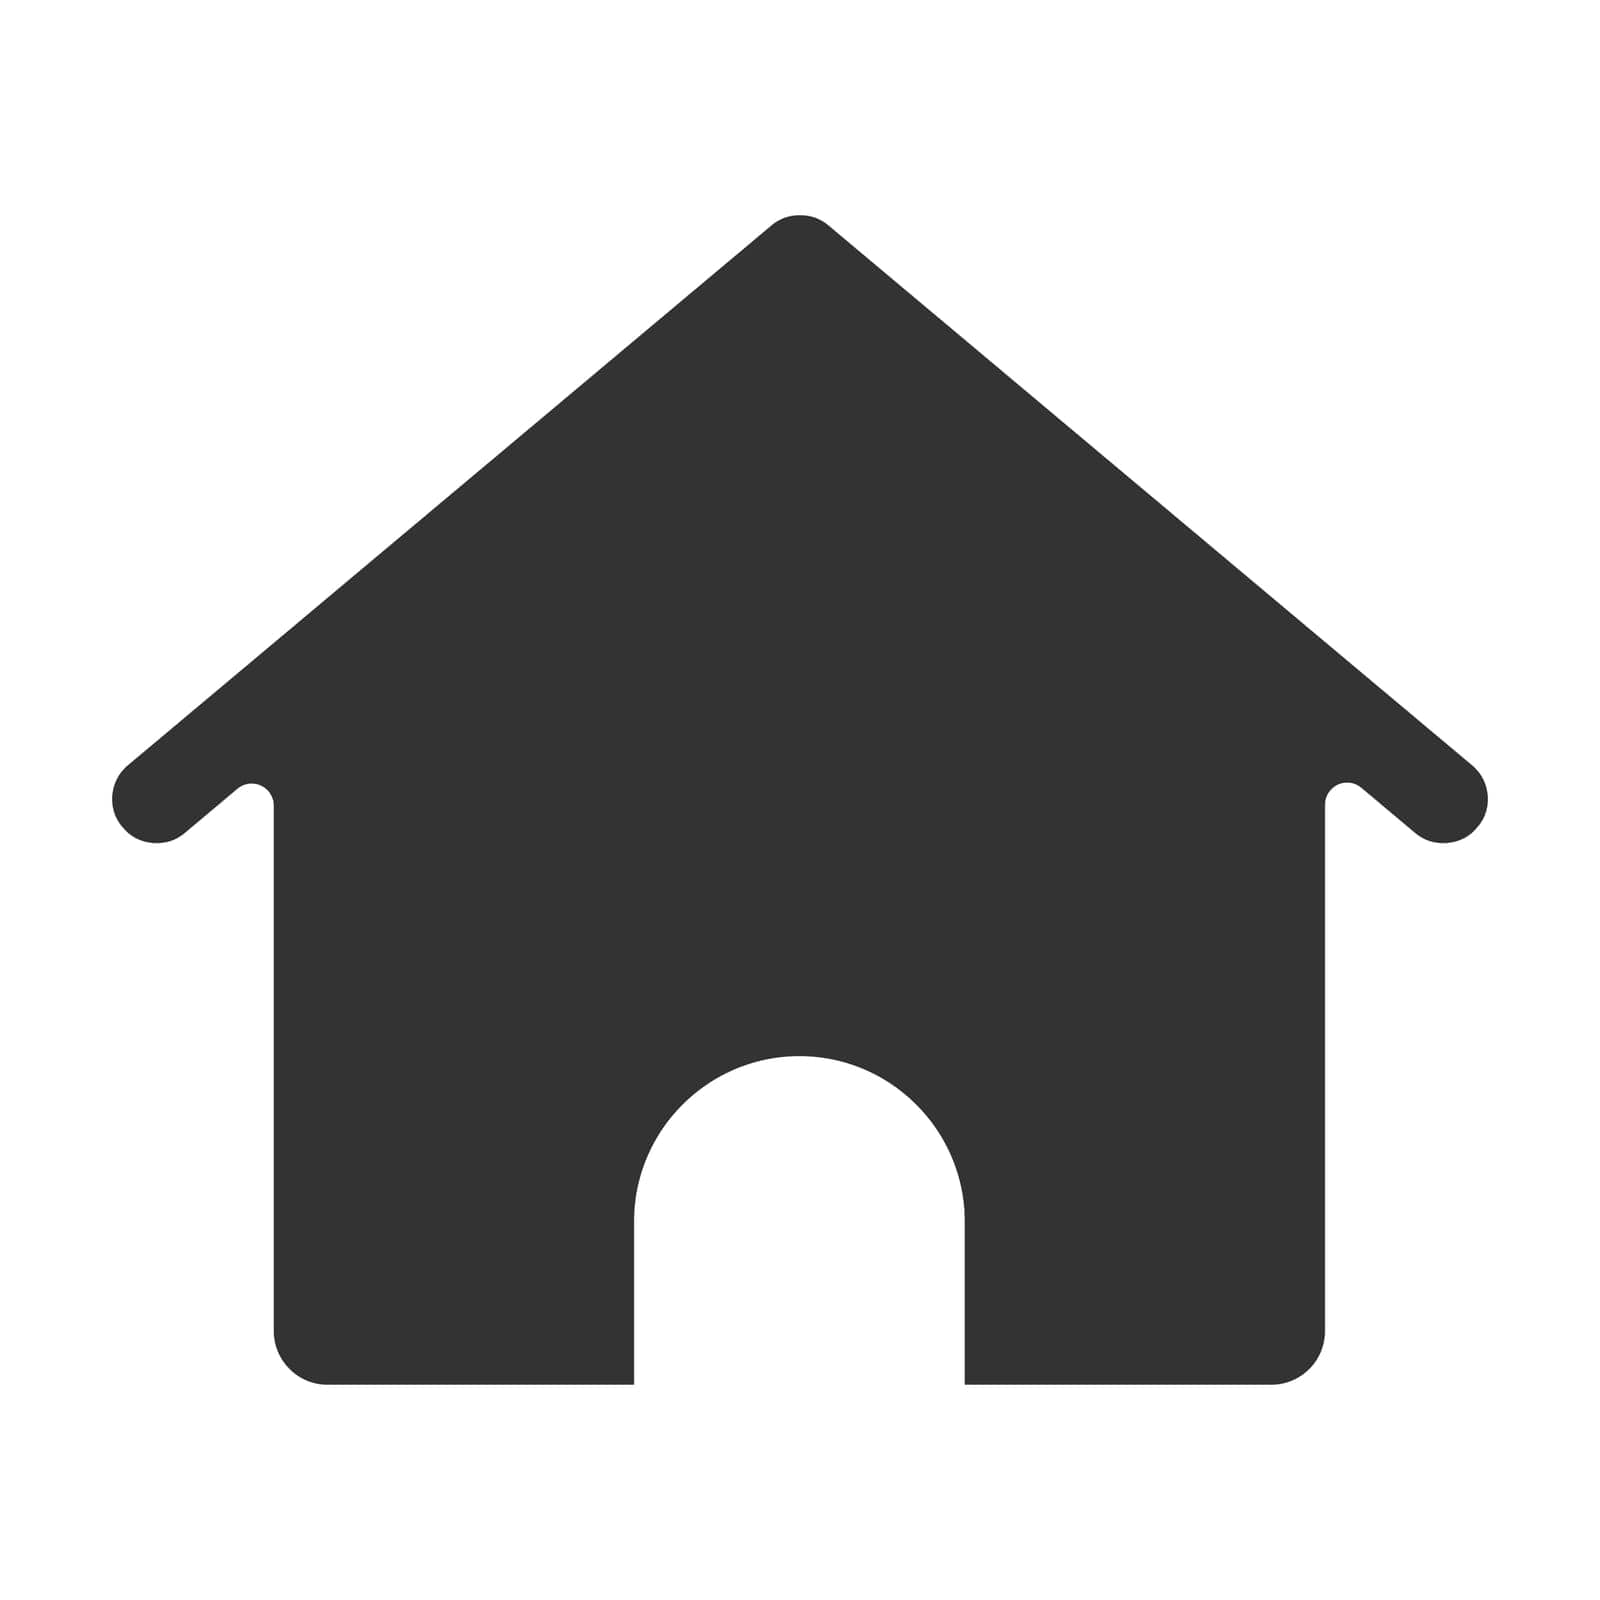 house glyph icon isolated on white background. house vector icon for web, mobile and ui design